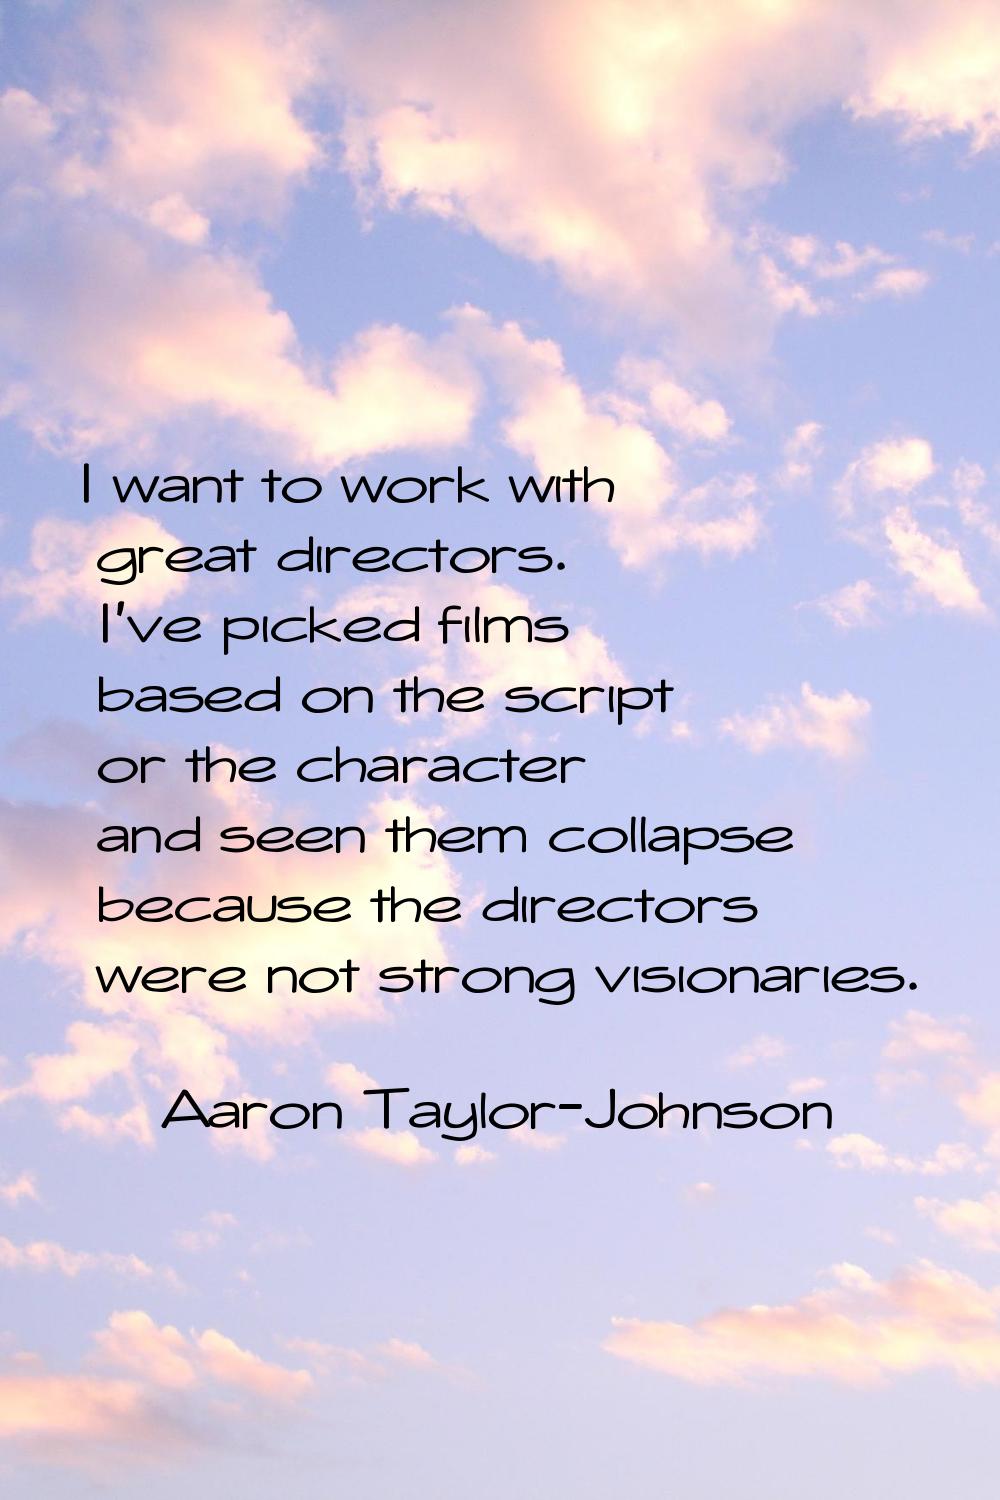 I want to work with great directors. I've picked films based on the script or the character and see